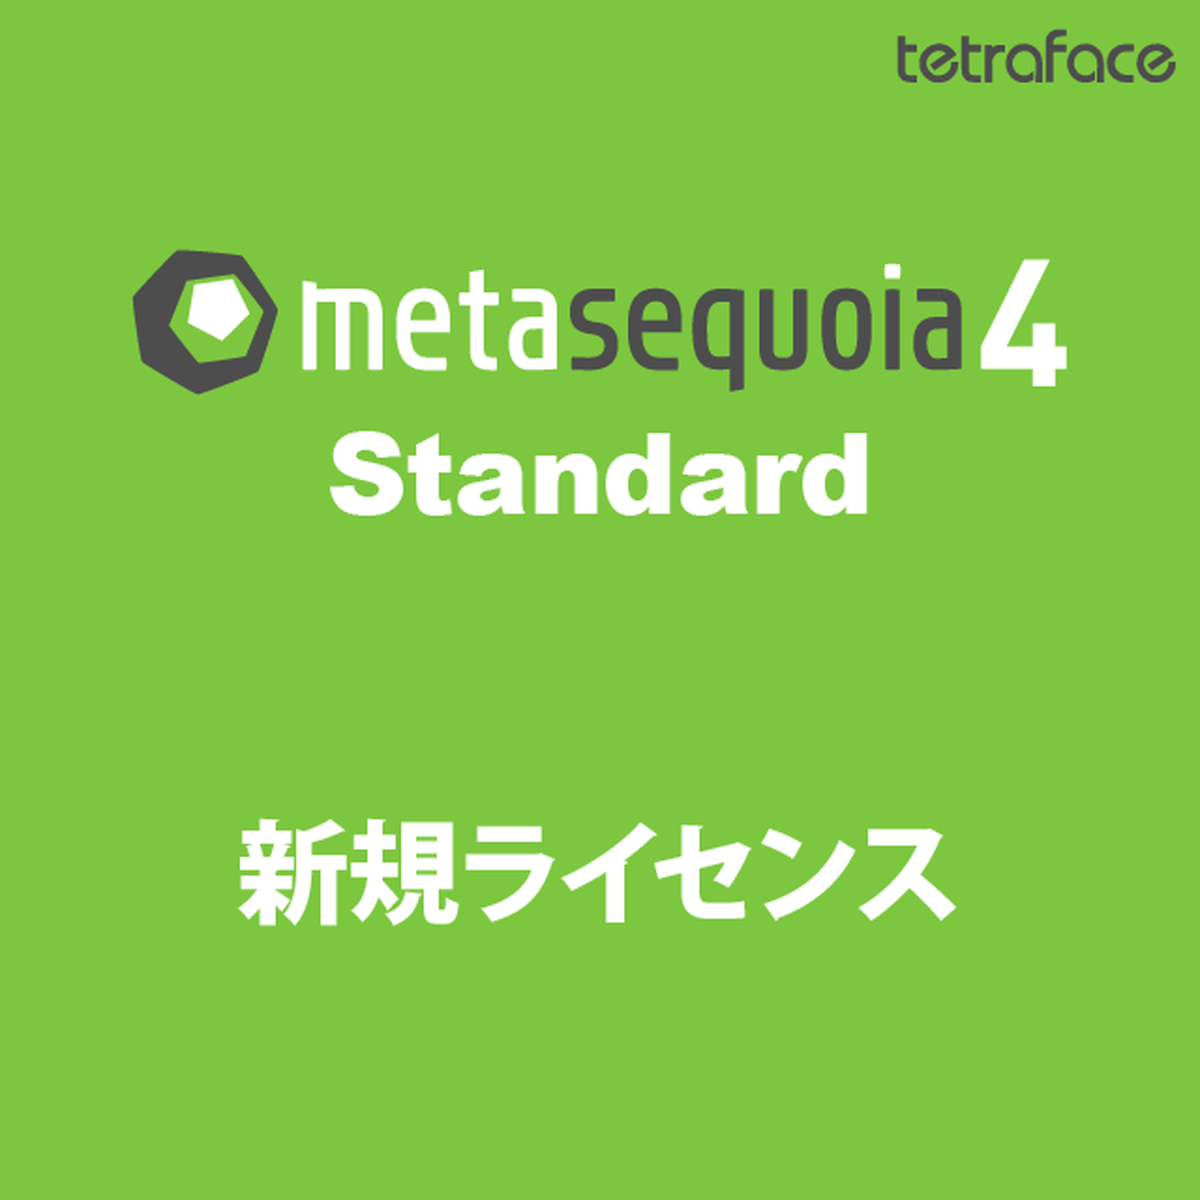 download the new Metasequoia 4.8.6a